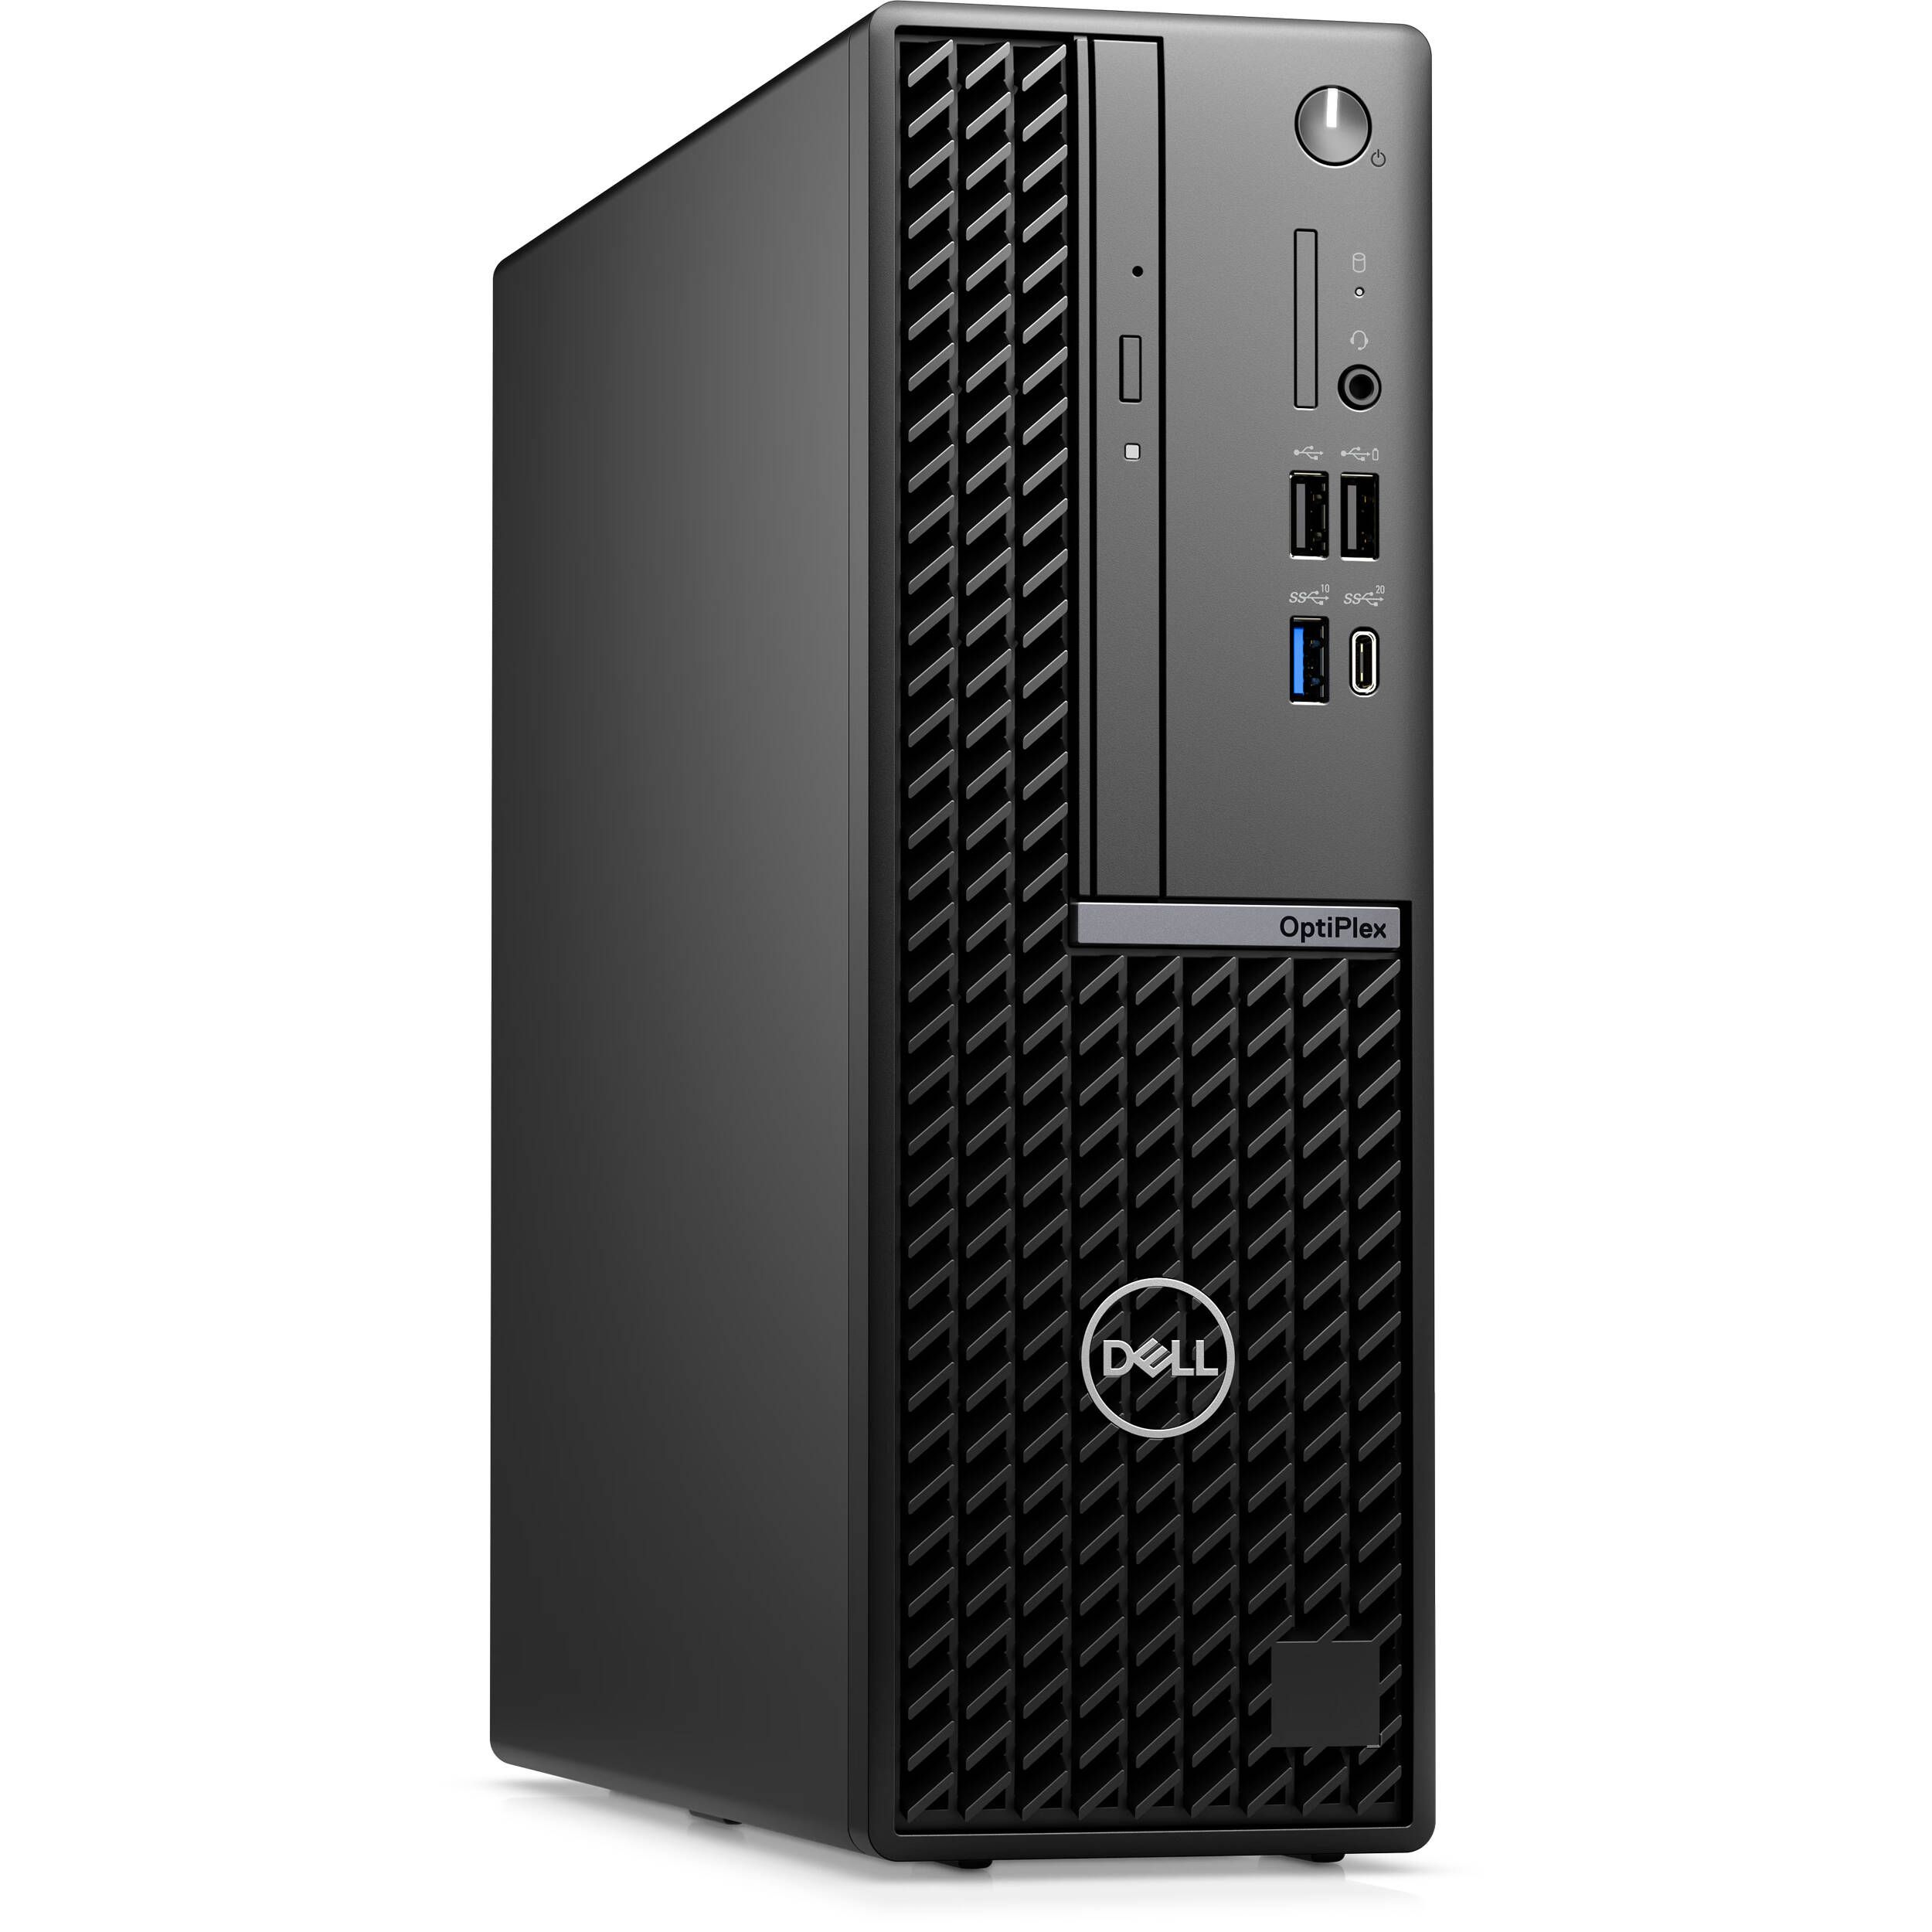 Desktop Dell OptiPlex 7010 Plus SFF, 300W Platinum Power Supply, WW, EPEAT 2018 Registered (Silver), ENERGY STAR Qualified, SW Driver, Intel Rapid Storage Technology, OptiPlex Small Form, Trusted Platform Module (Discrete TPM Enabled), 13th Gen Intel Core i7-13700 (8+8 Cores/30MB/24T/2.1GHz to_1